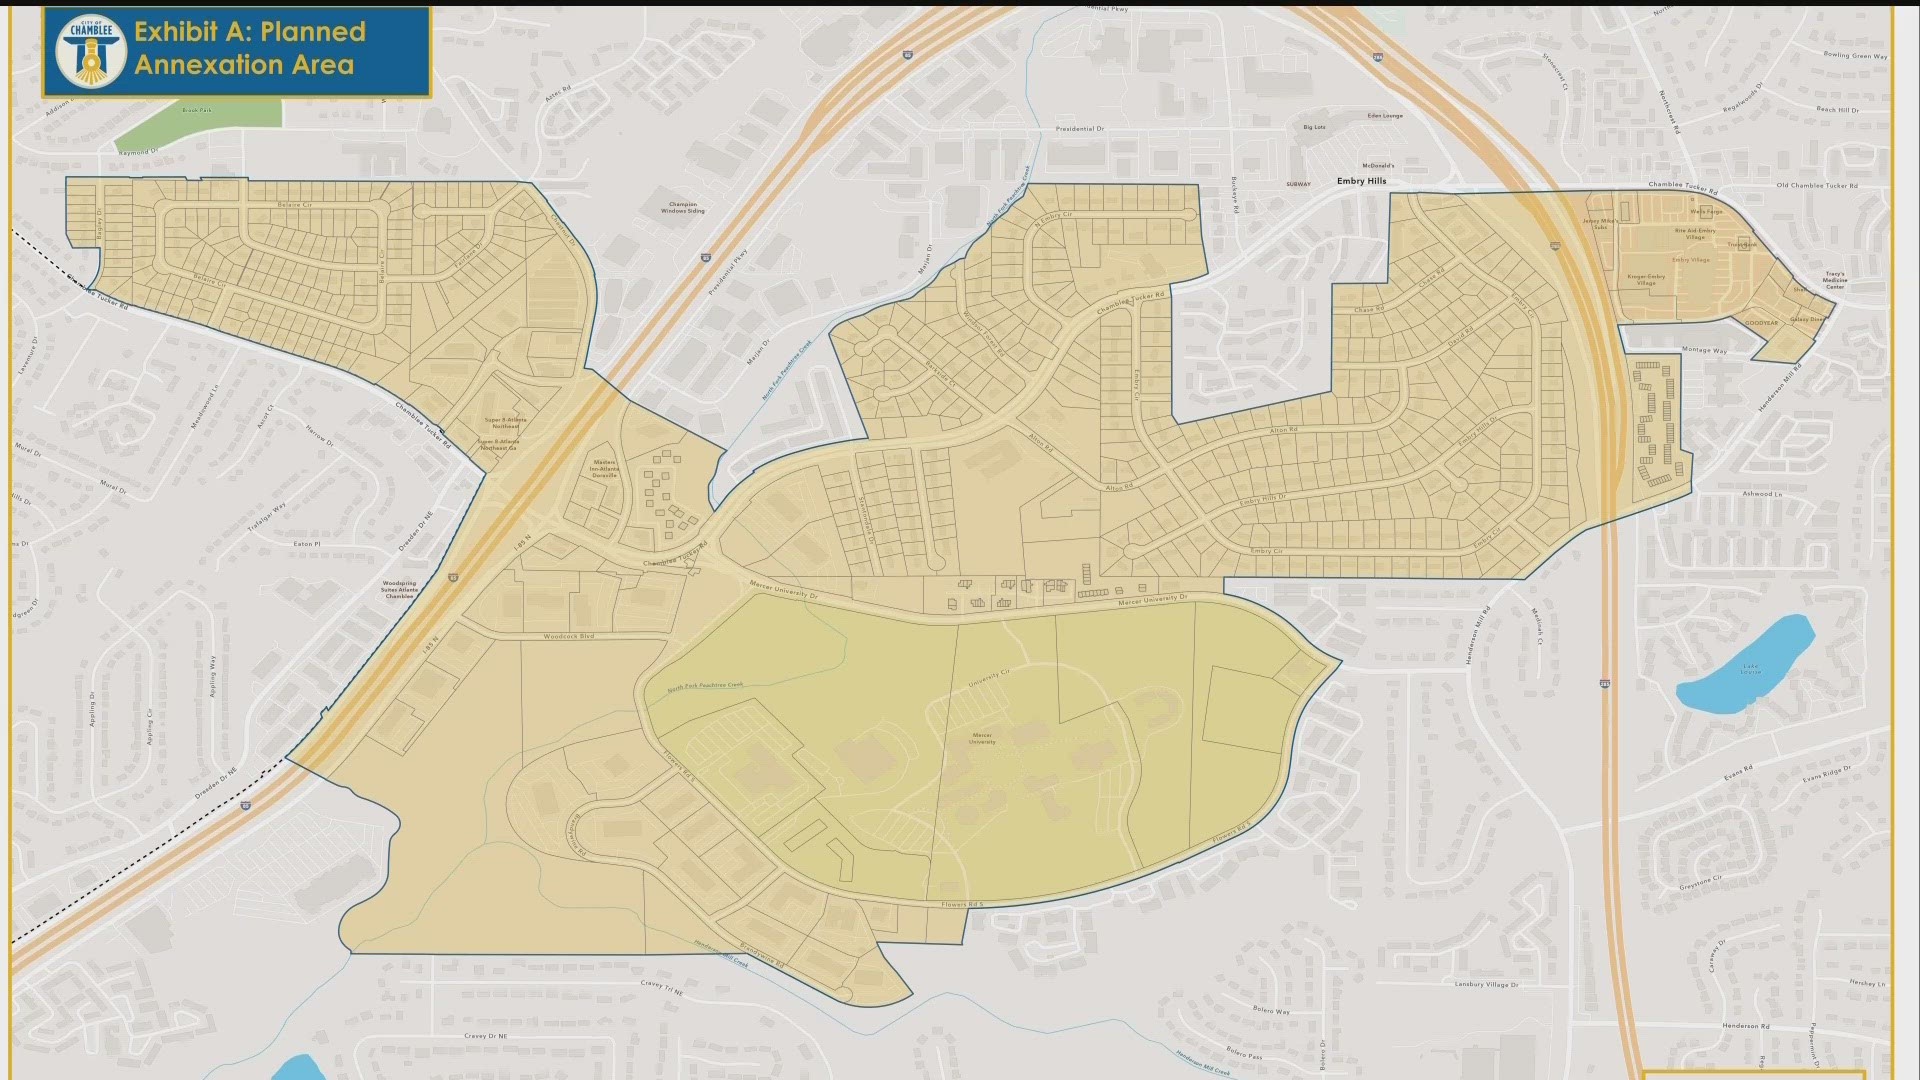 City leaders held a special meeting on Tuesday to accept the application and petition for annexation of several surrounding communities.